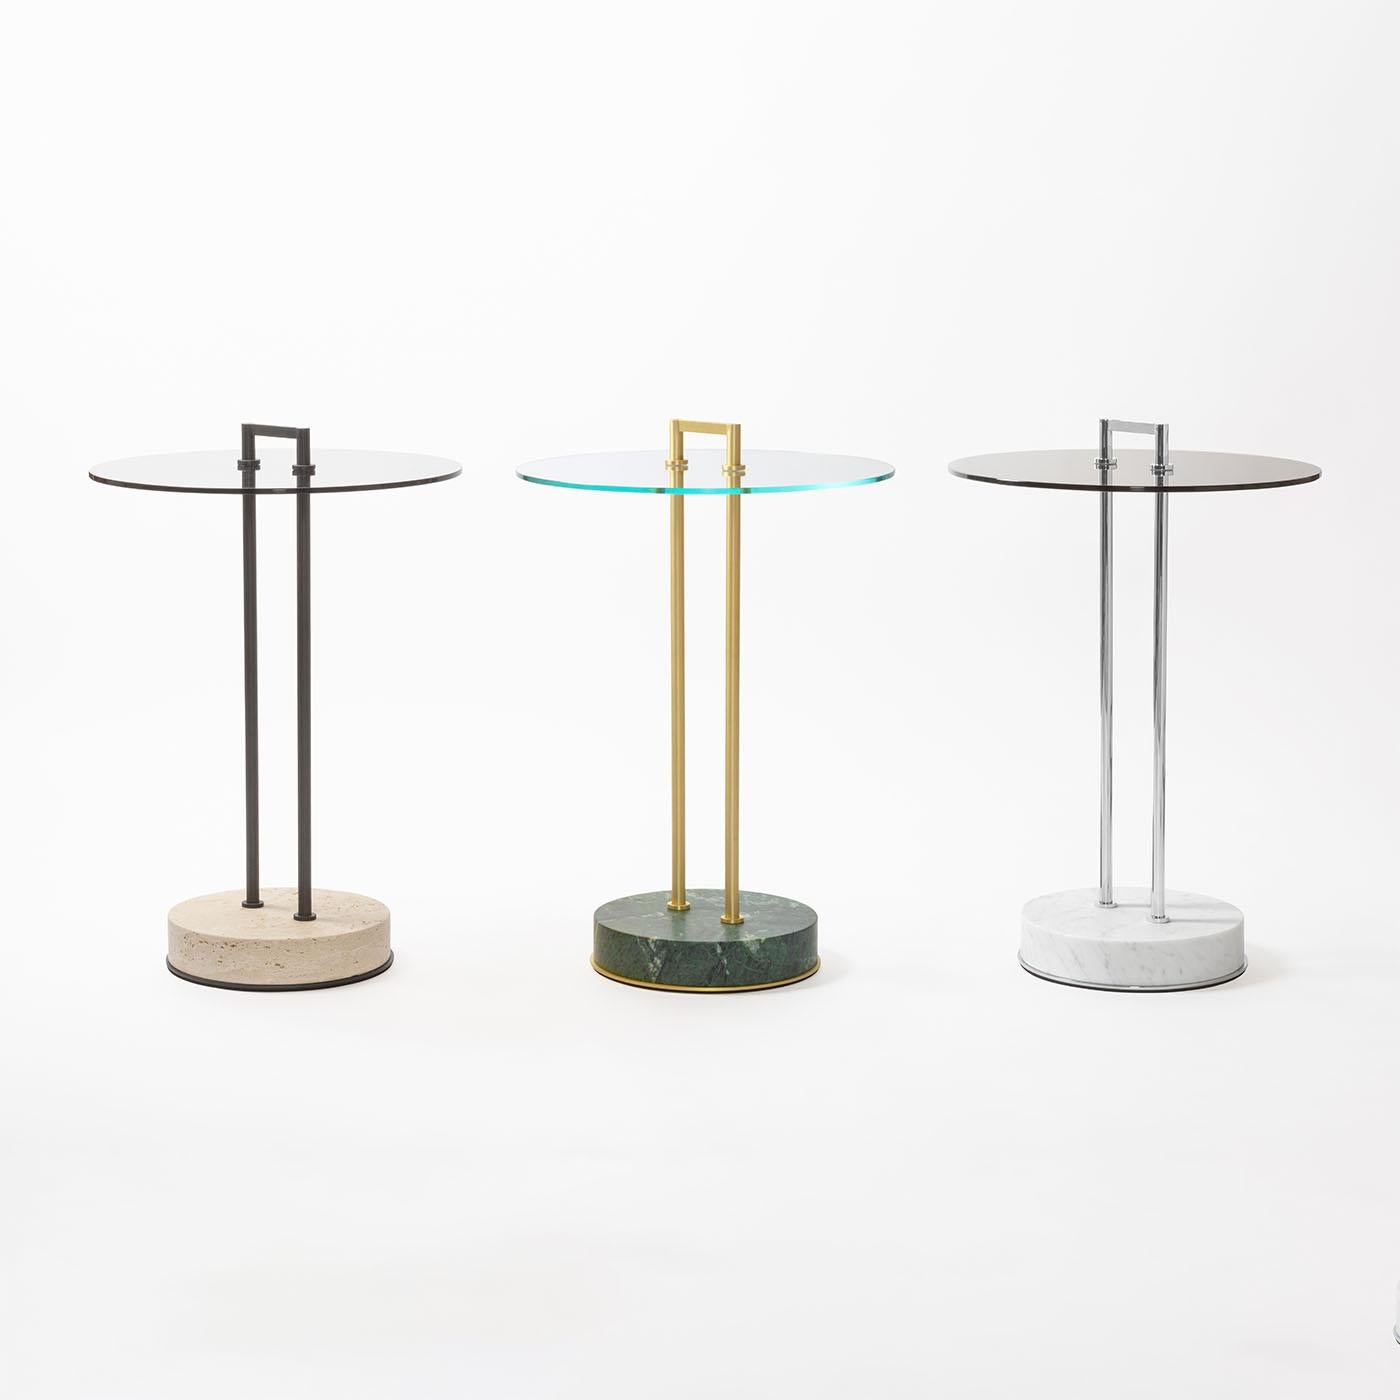 Metal structure available in three different finishes featuring a fine marble base and a glass top which can be either transparent or dark bronze-colored. This slim, elegantly functional occasional table is the ideal solution to enhance any corner